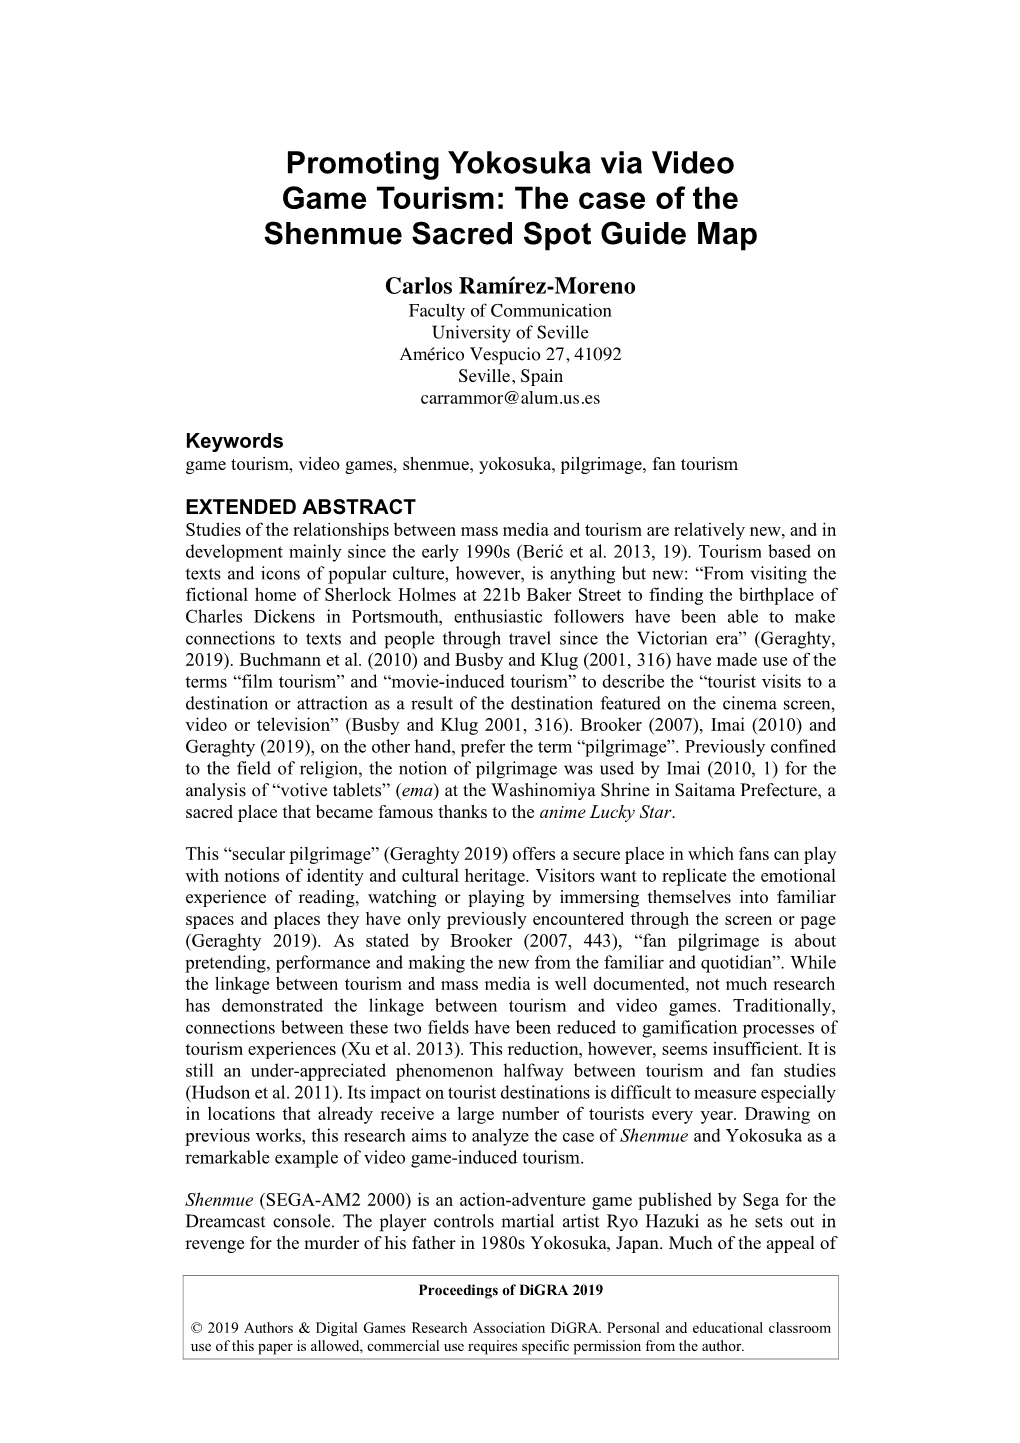 Promoting Yokosuka Via Video Game Tourism: the Case of the Shenmue Sacred Spot Guide Map